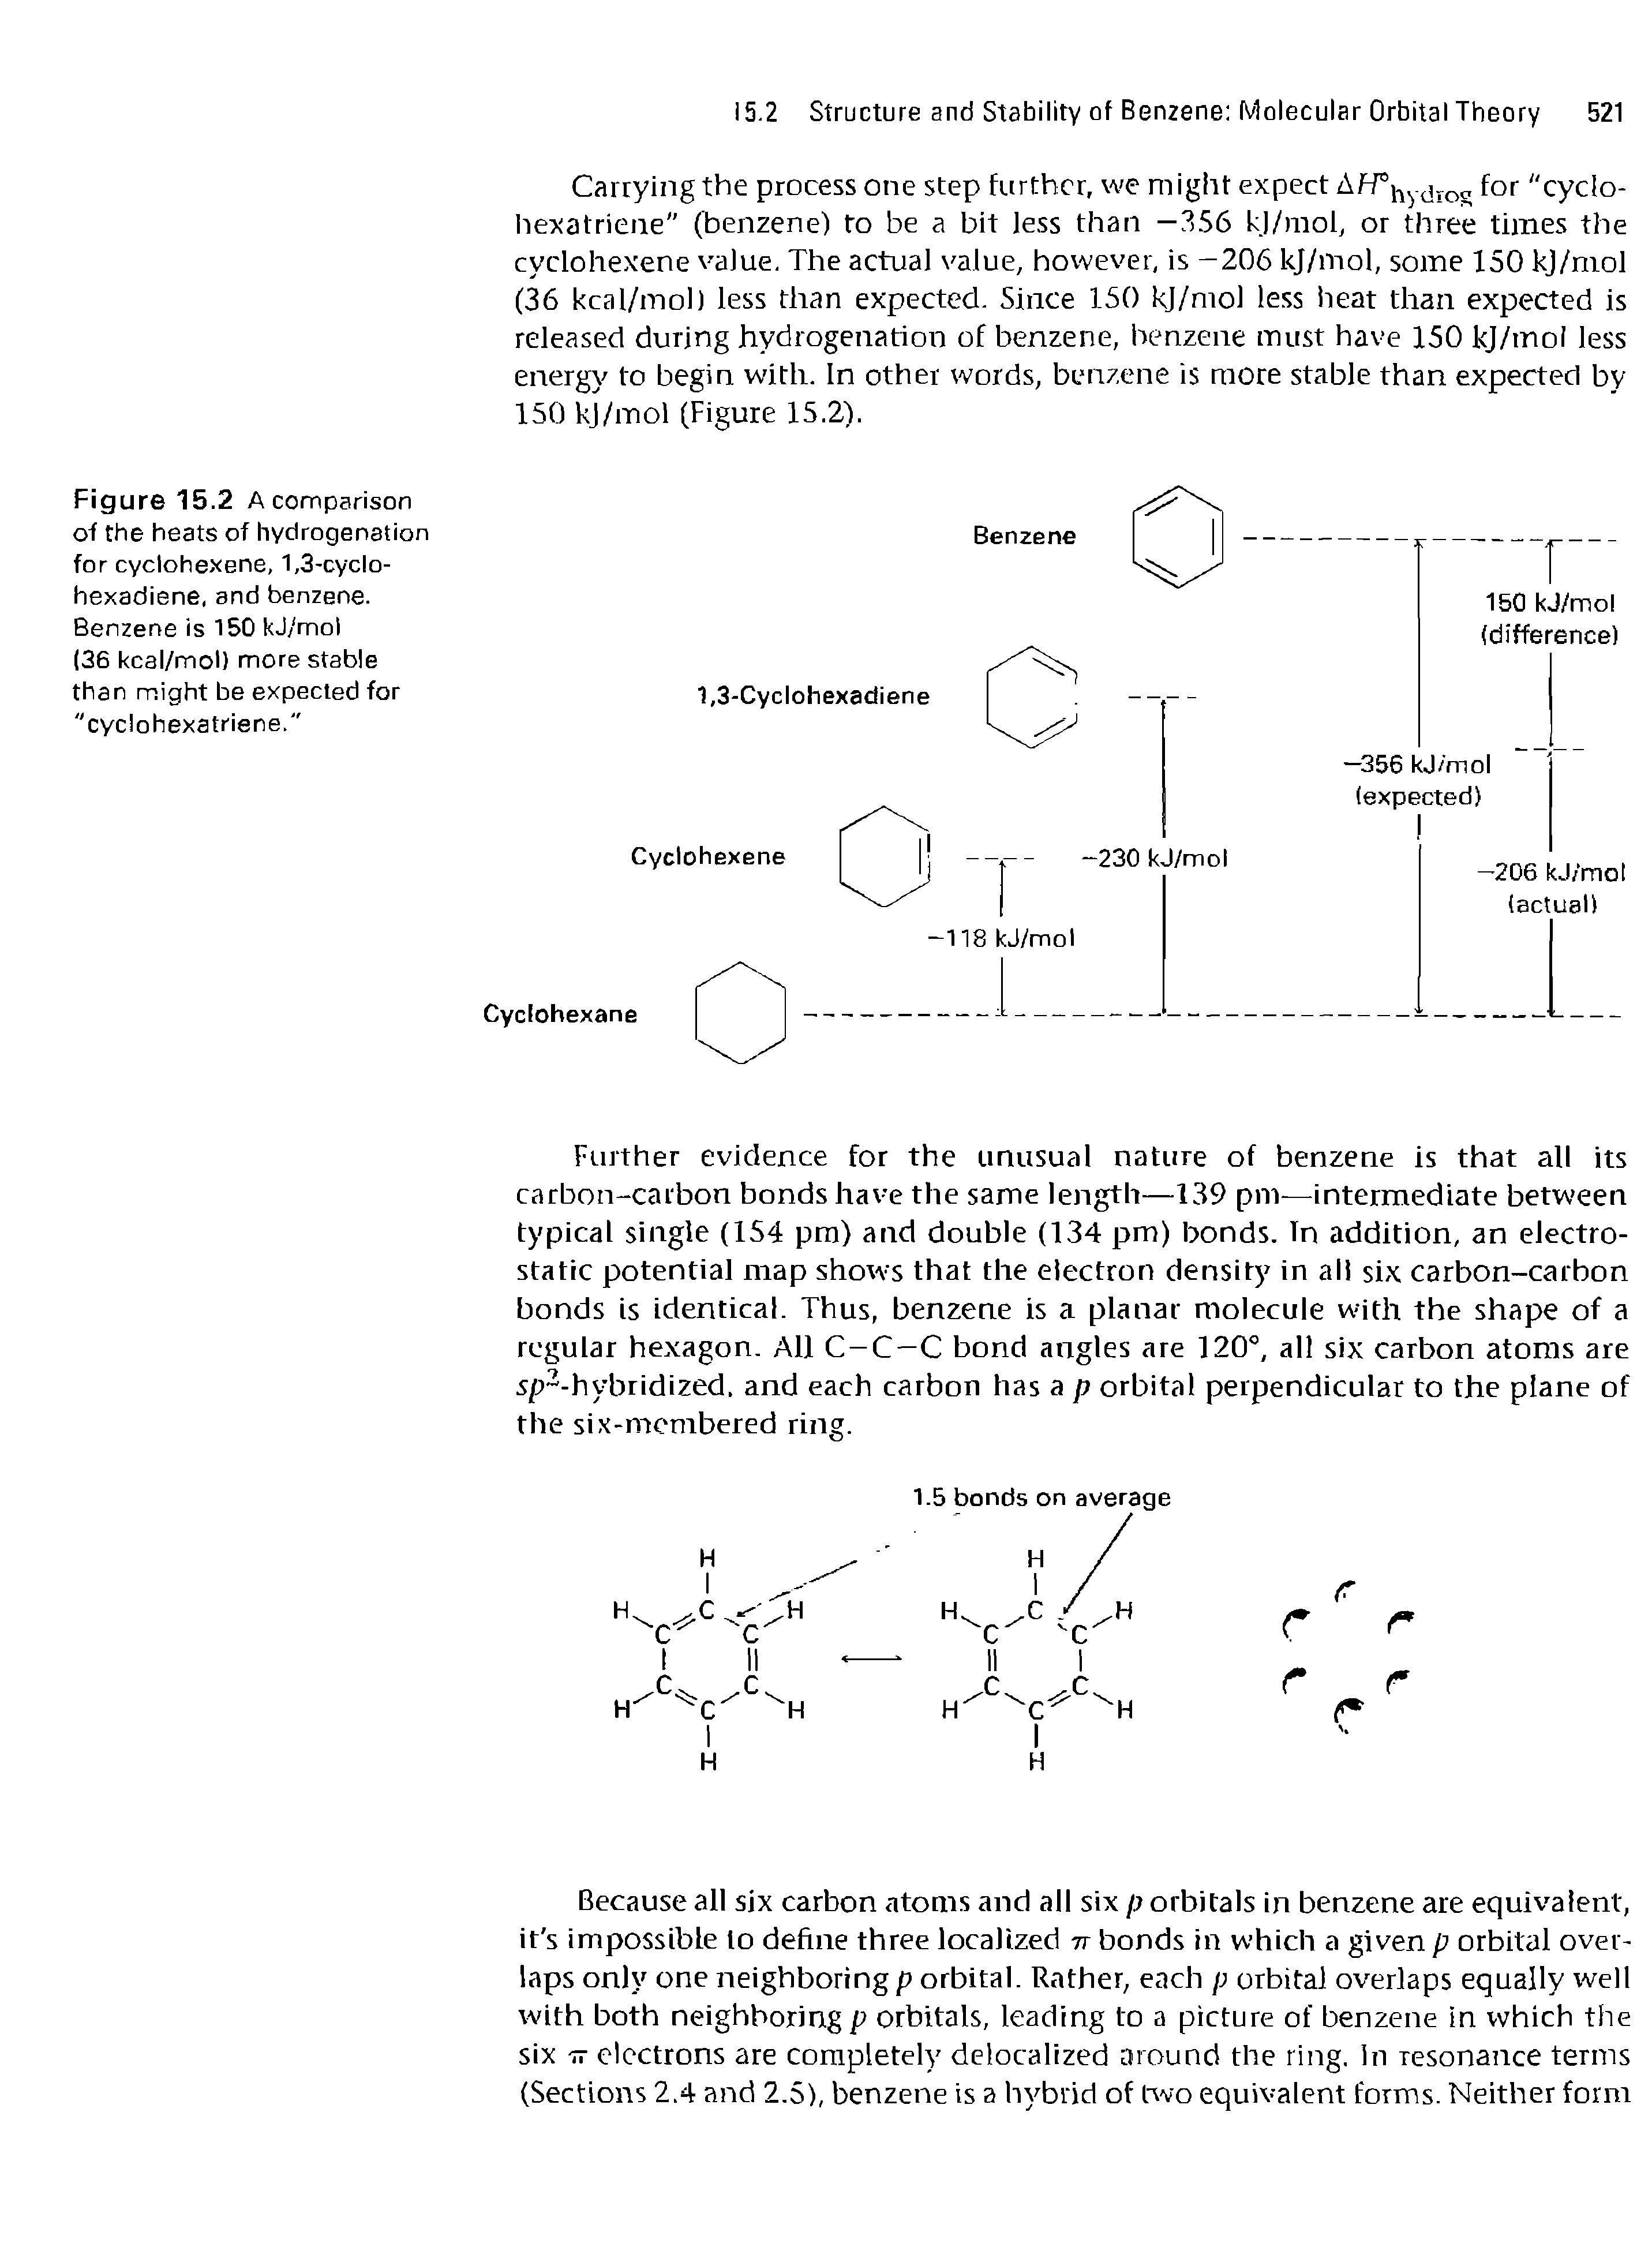 Figure 15.2 A comparison of the heats of hydrogenation for cyclohexene, 1,3-cyclo-hexadiene, and benzene. Benzene is 150 kJ/mol (36 keal/mol) more stable than might be expected for "cyclohexatriene."...